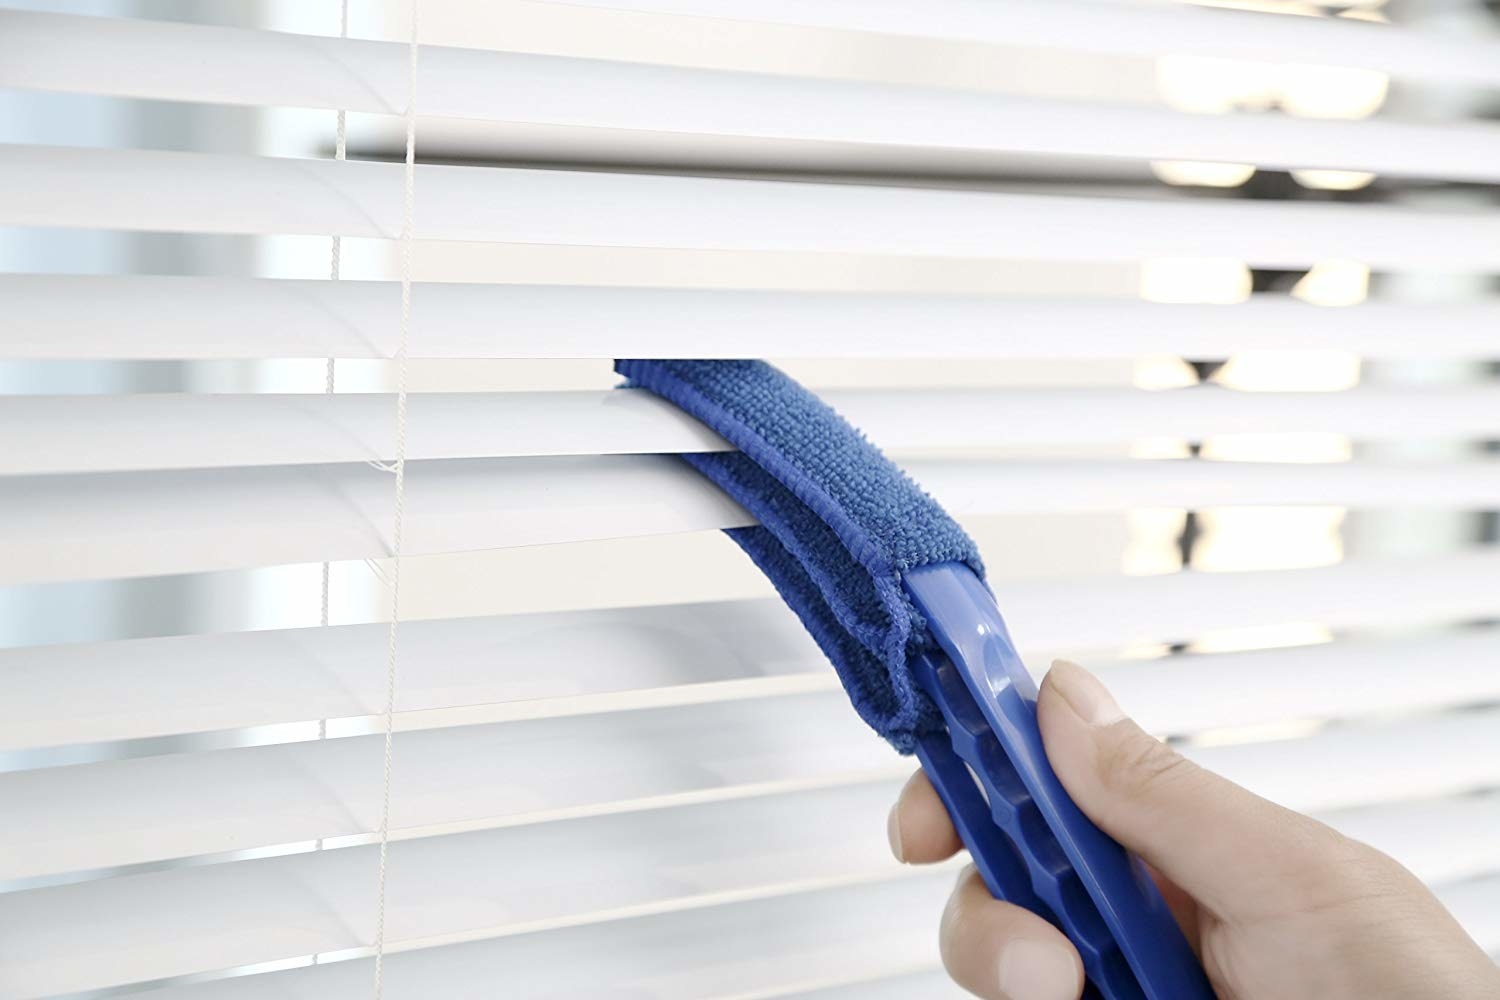 The wand cleaning three surfaces of Venetian blinds at once